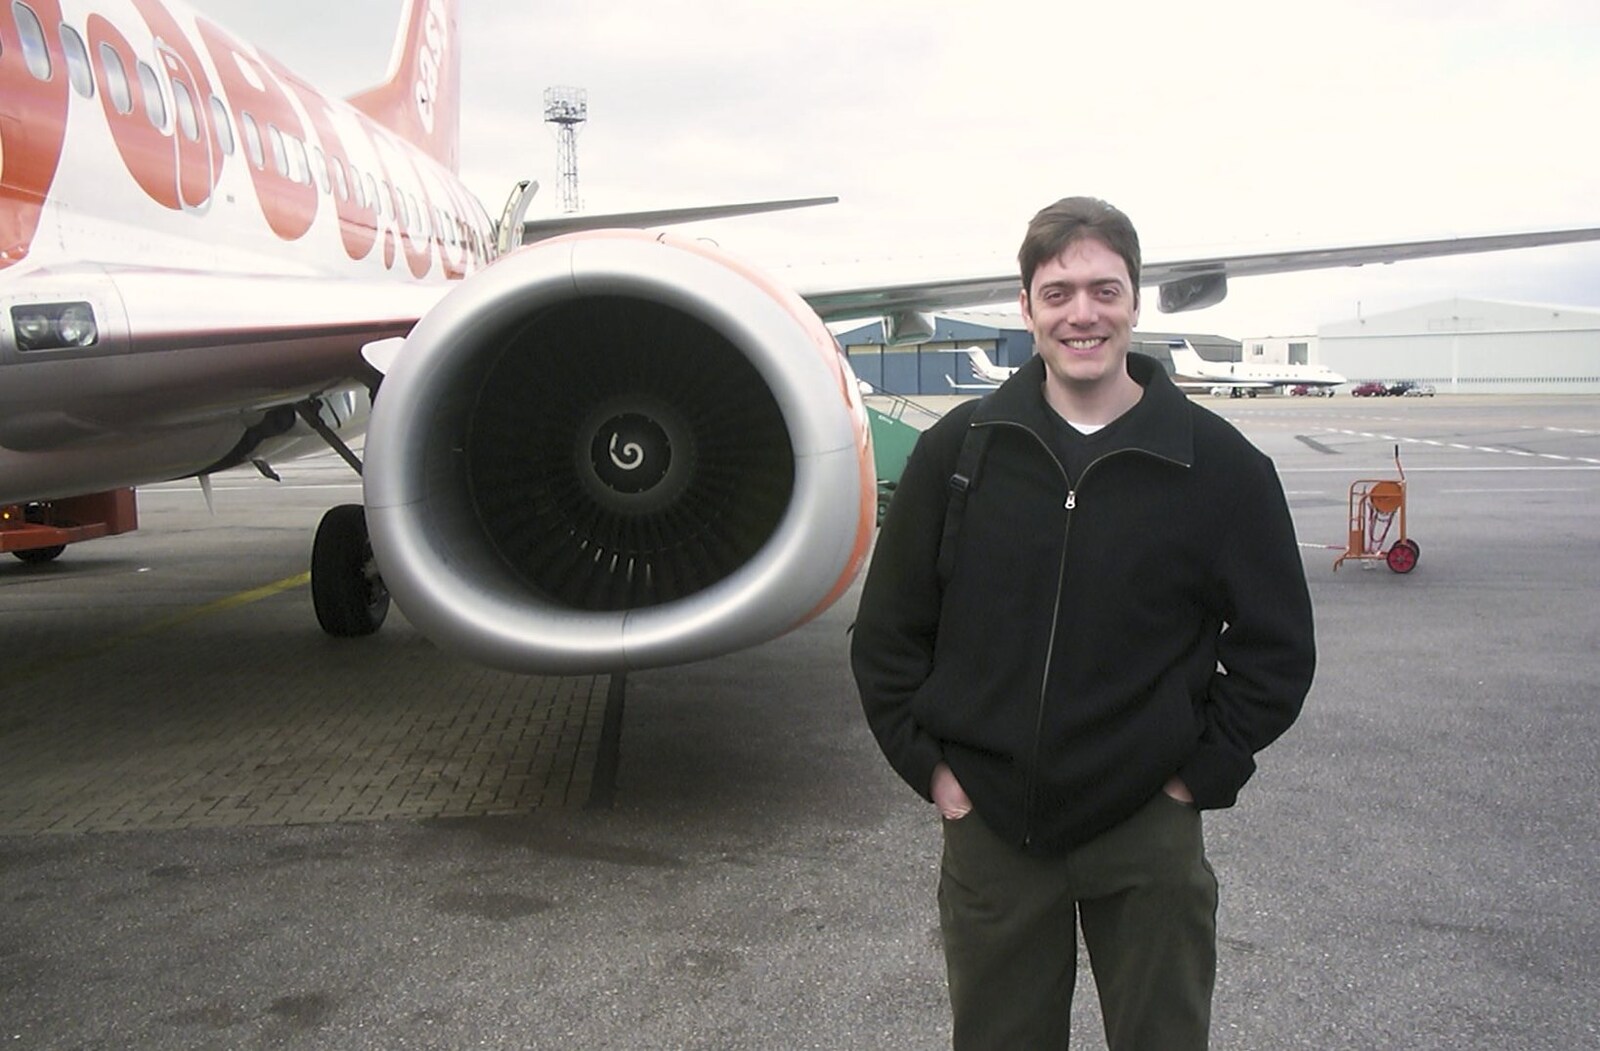 Stef pauses by our Easy Jet plane for a photo from 3G Lab Goes Skiing In Chamonix, France - 12th March 2002